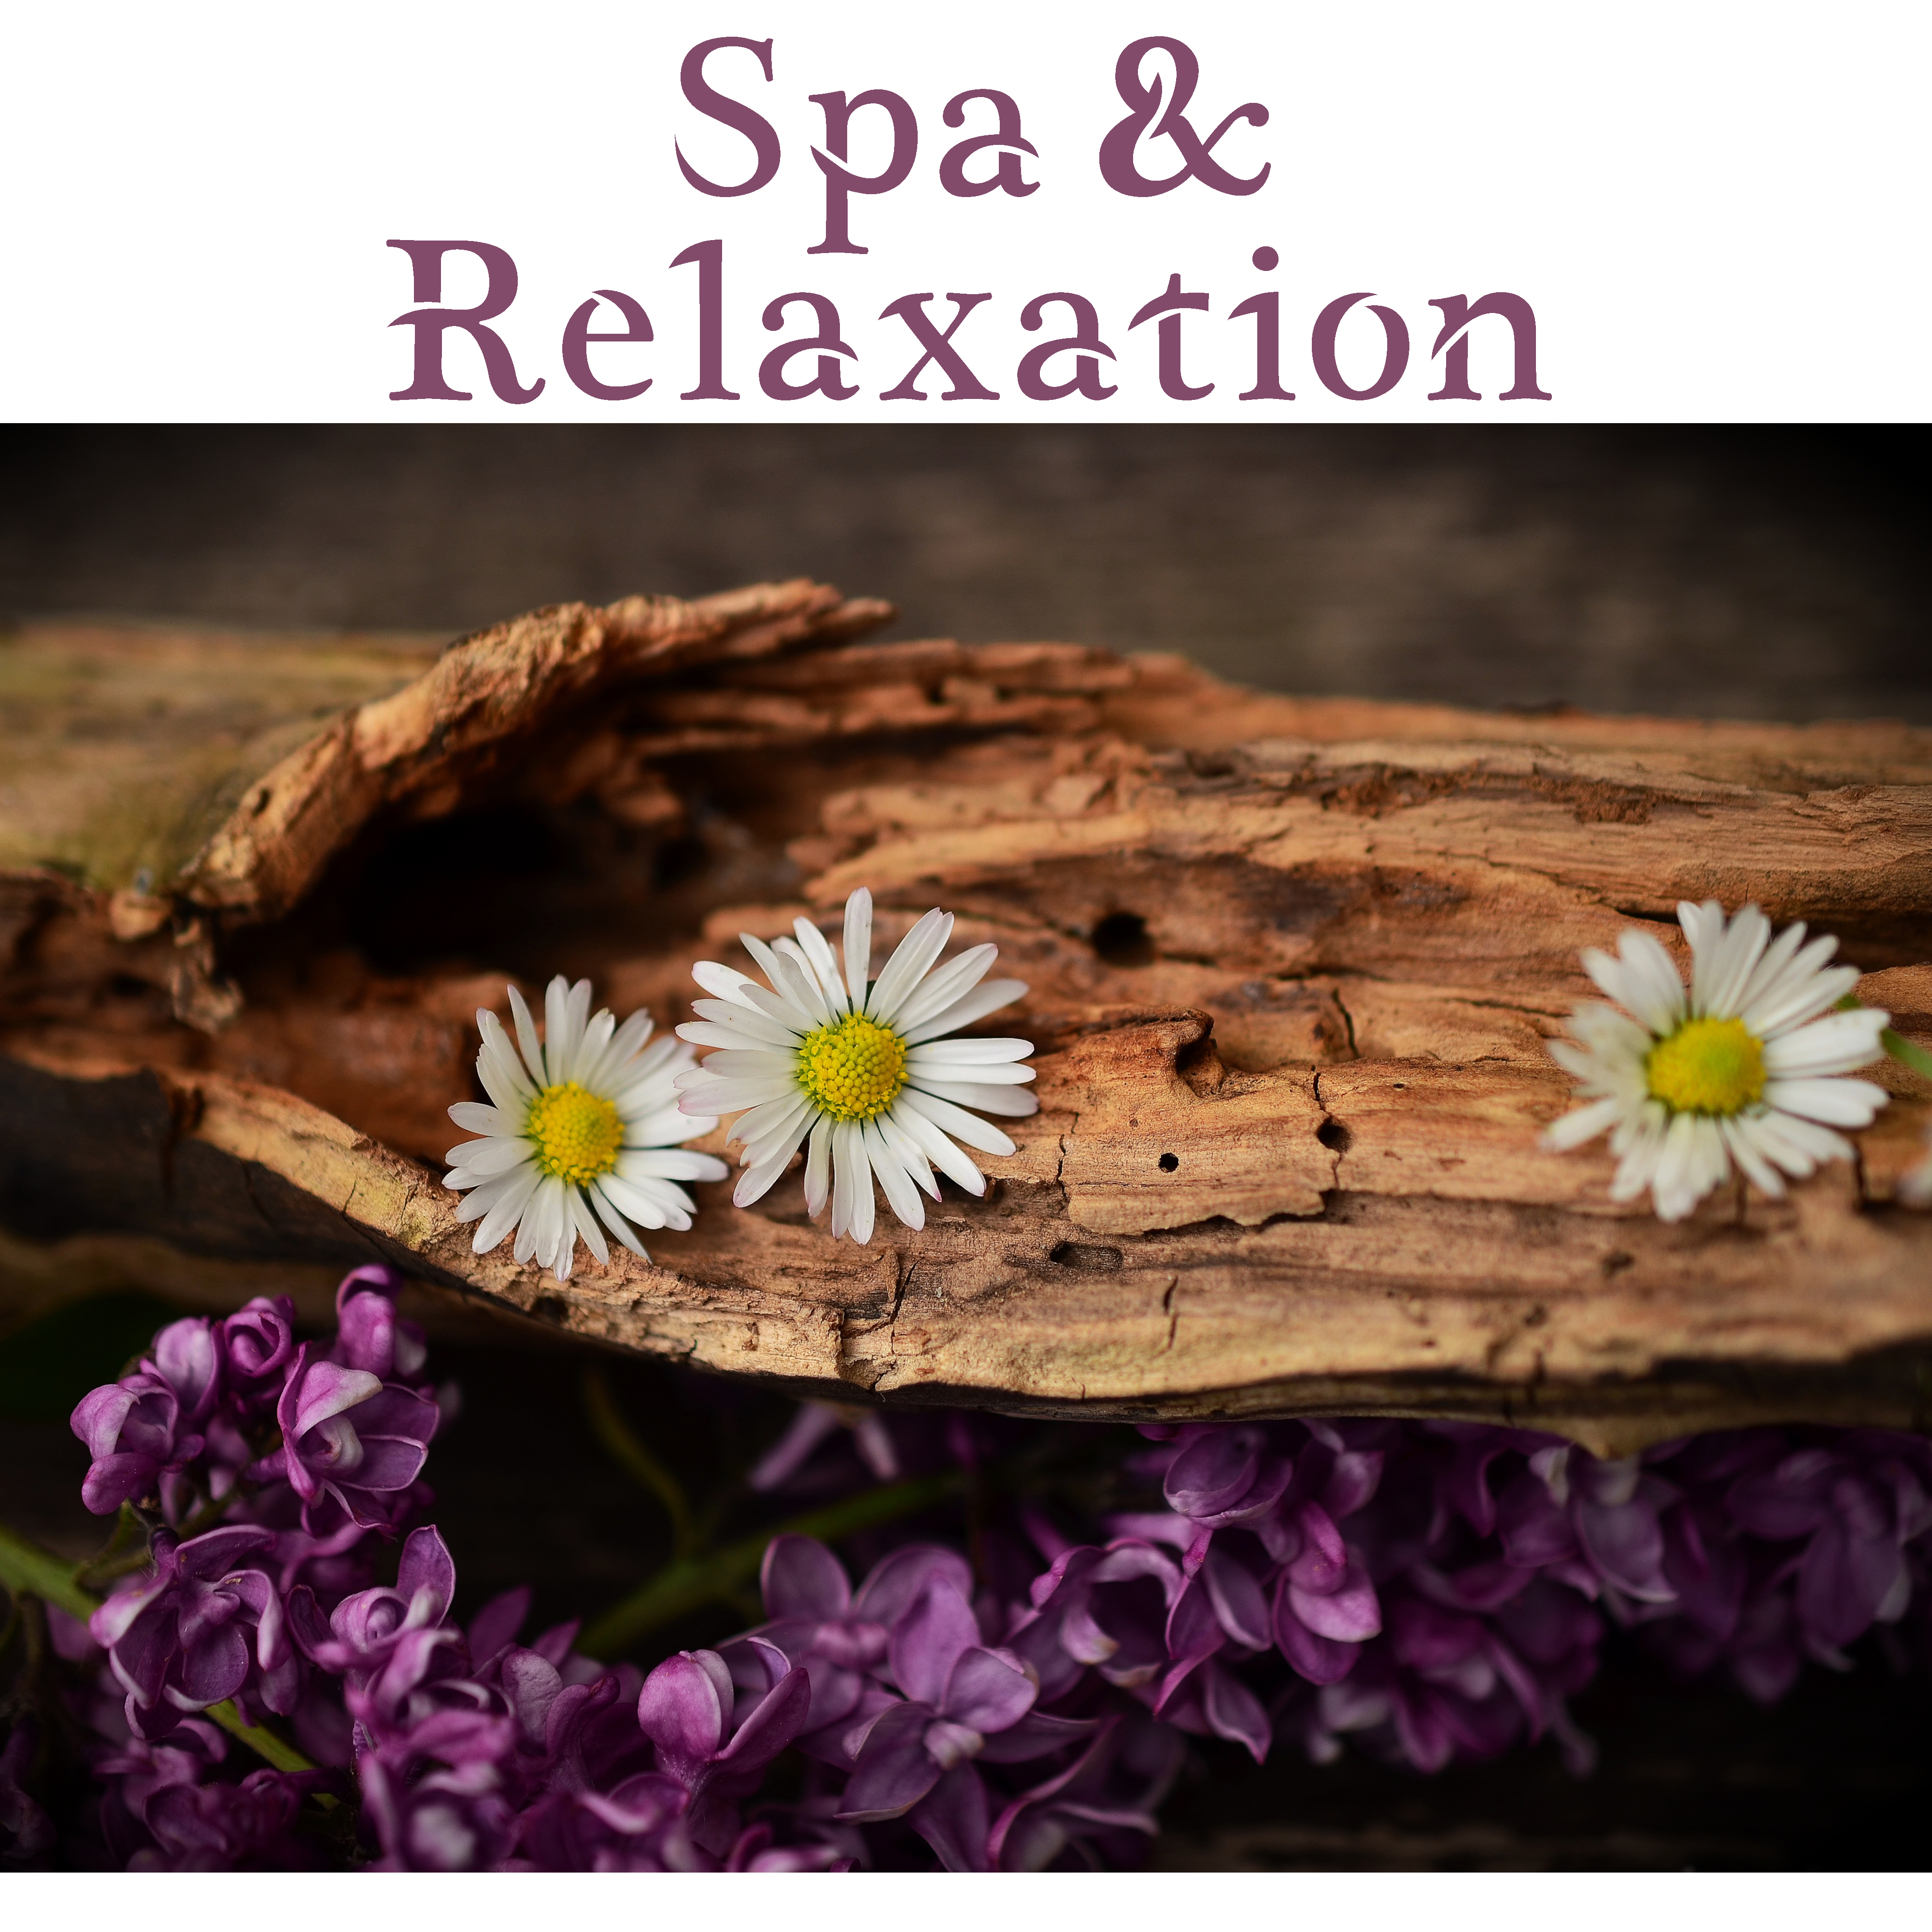 Spa & Relaxation – New Age Music for Massage, Spa, Meditation Dreams, Heal Your Heart